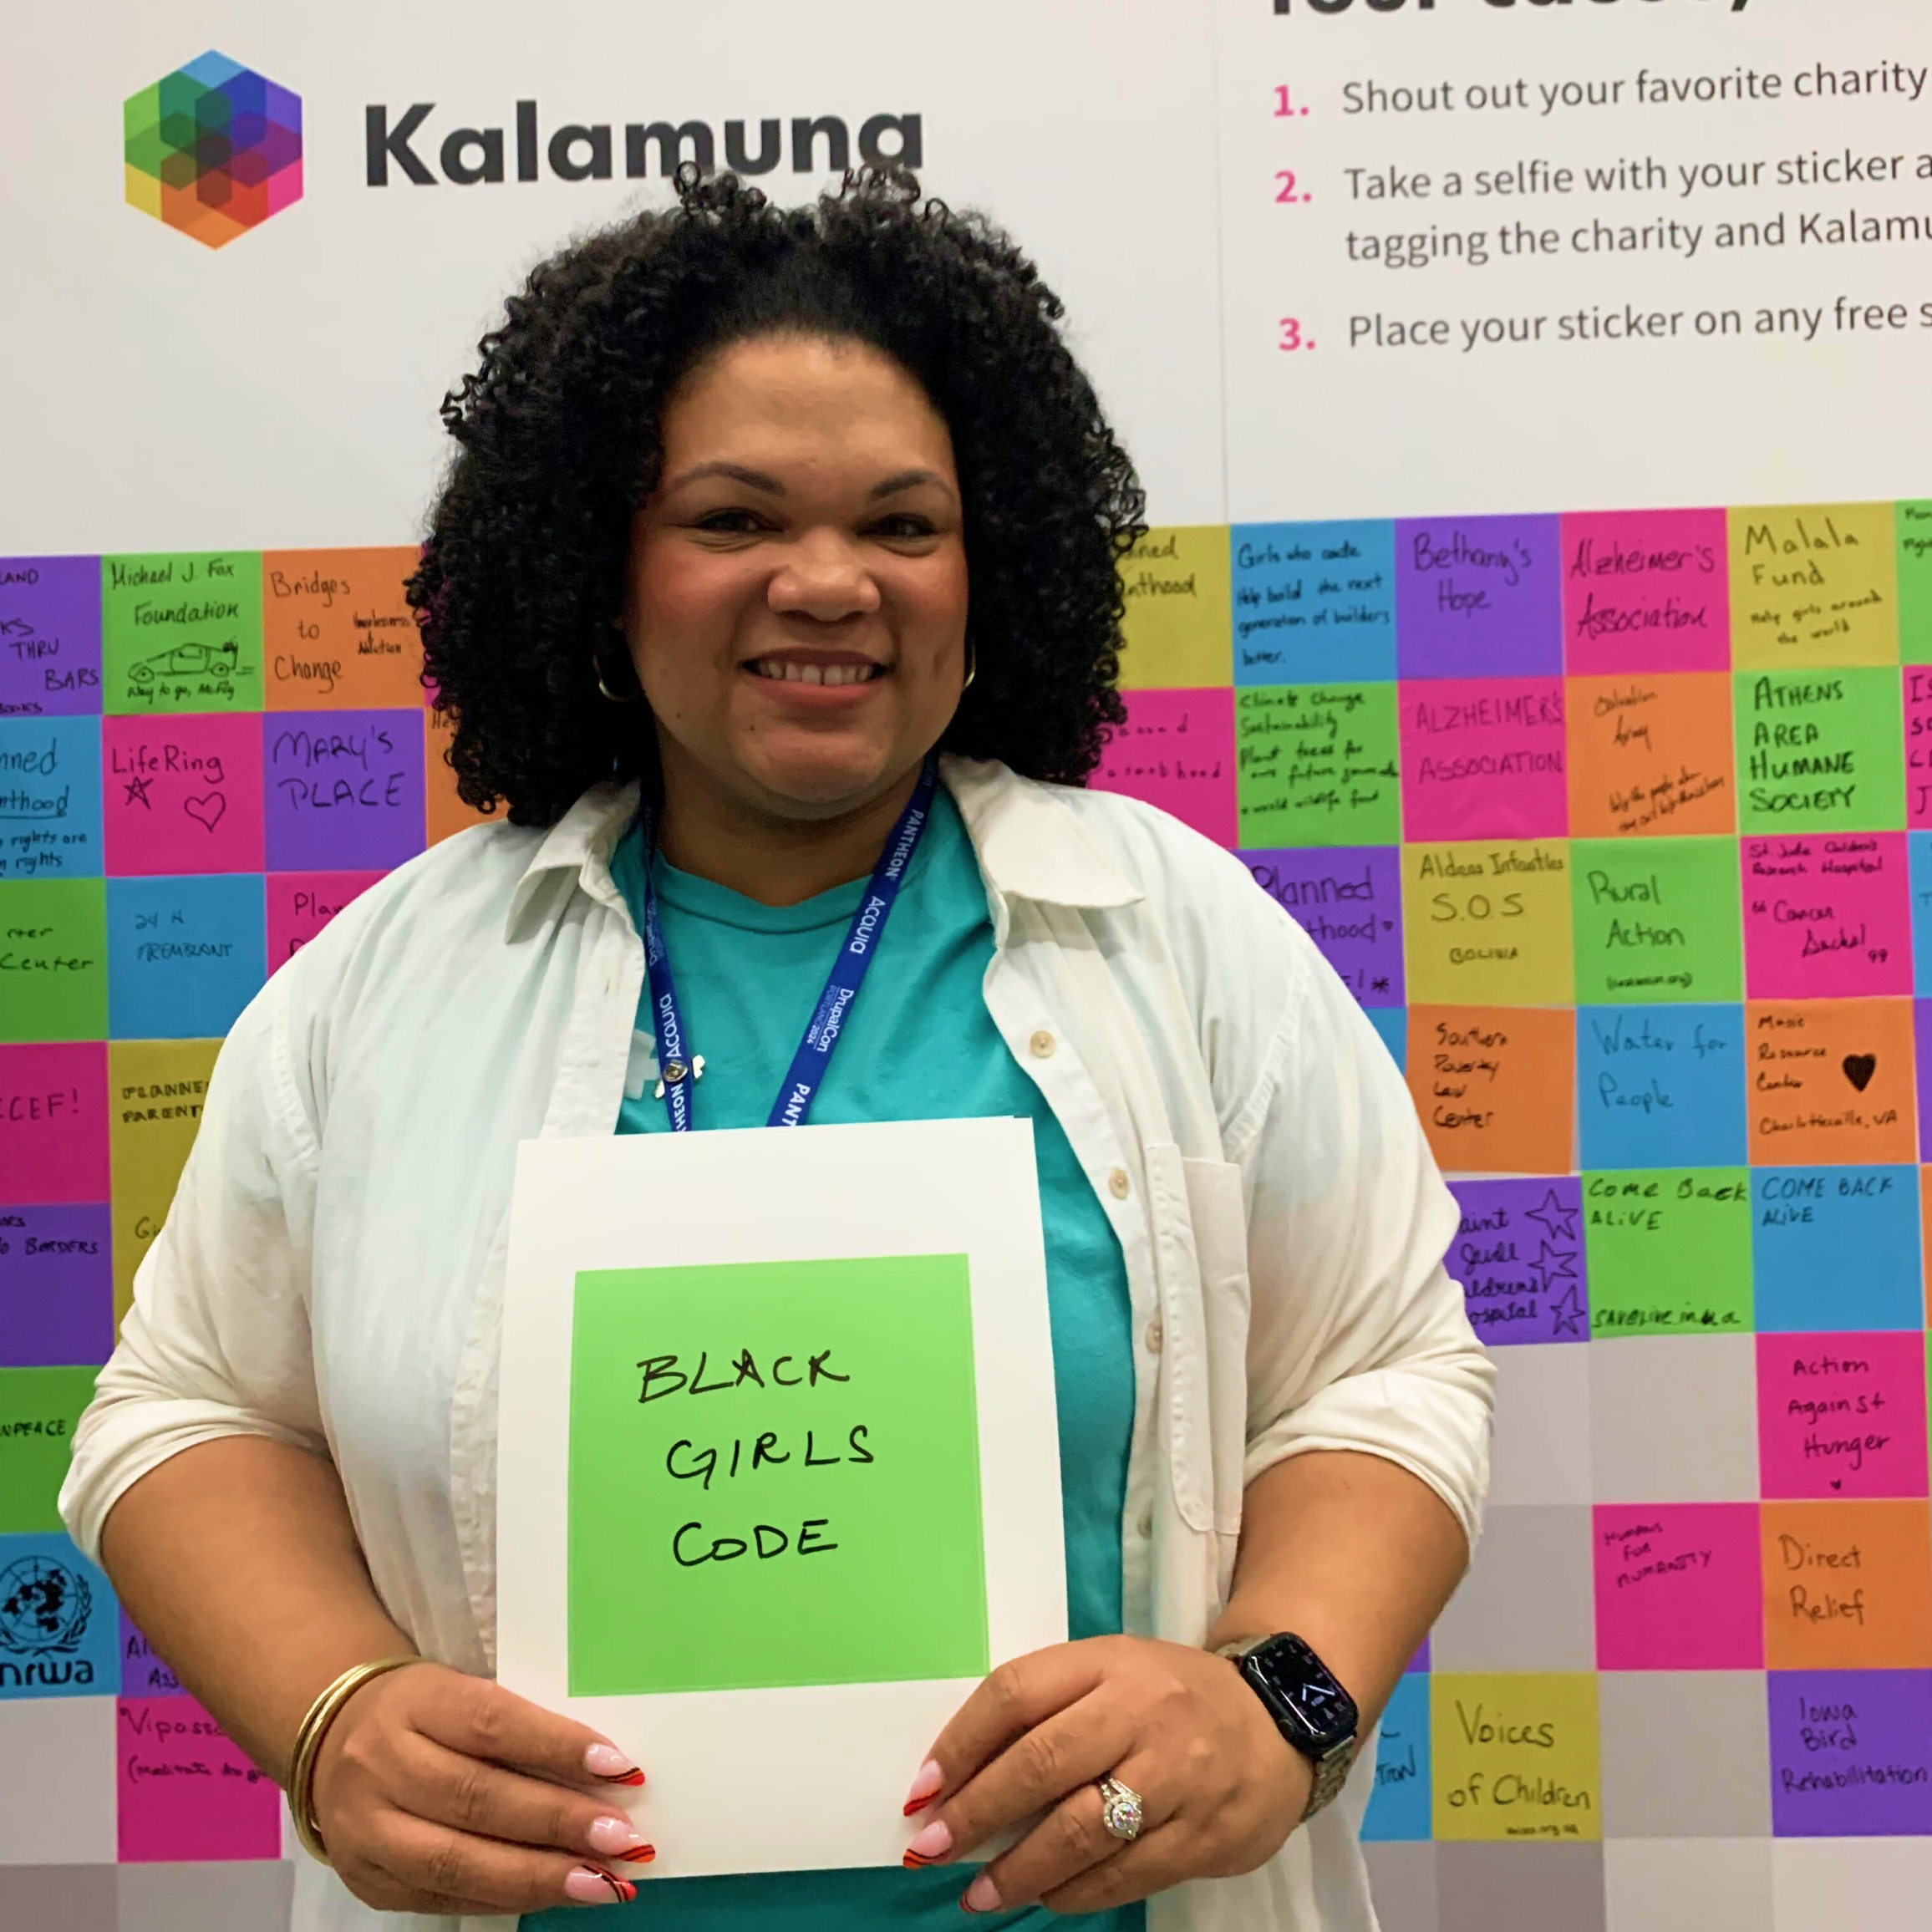 Britany Acre holds a green square sticker with "Black Girls Code" written on it.